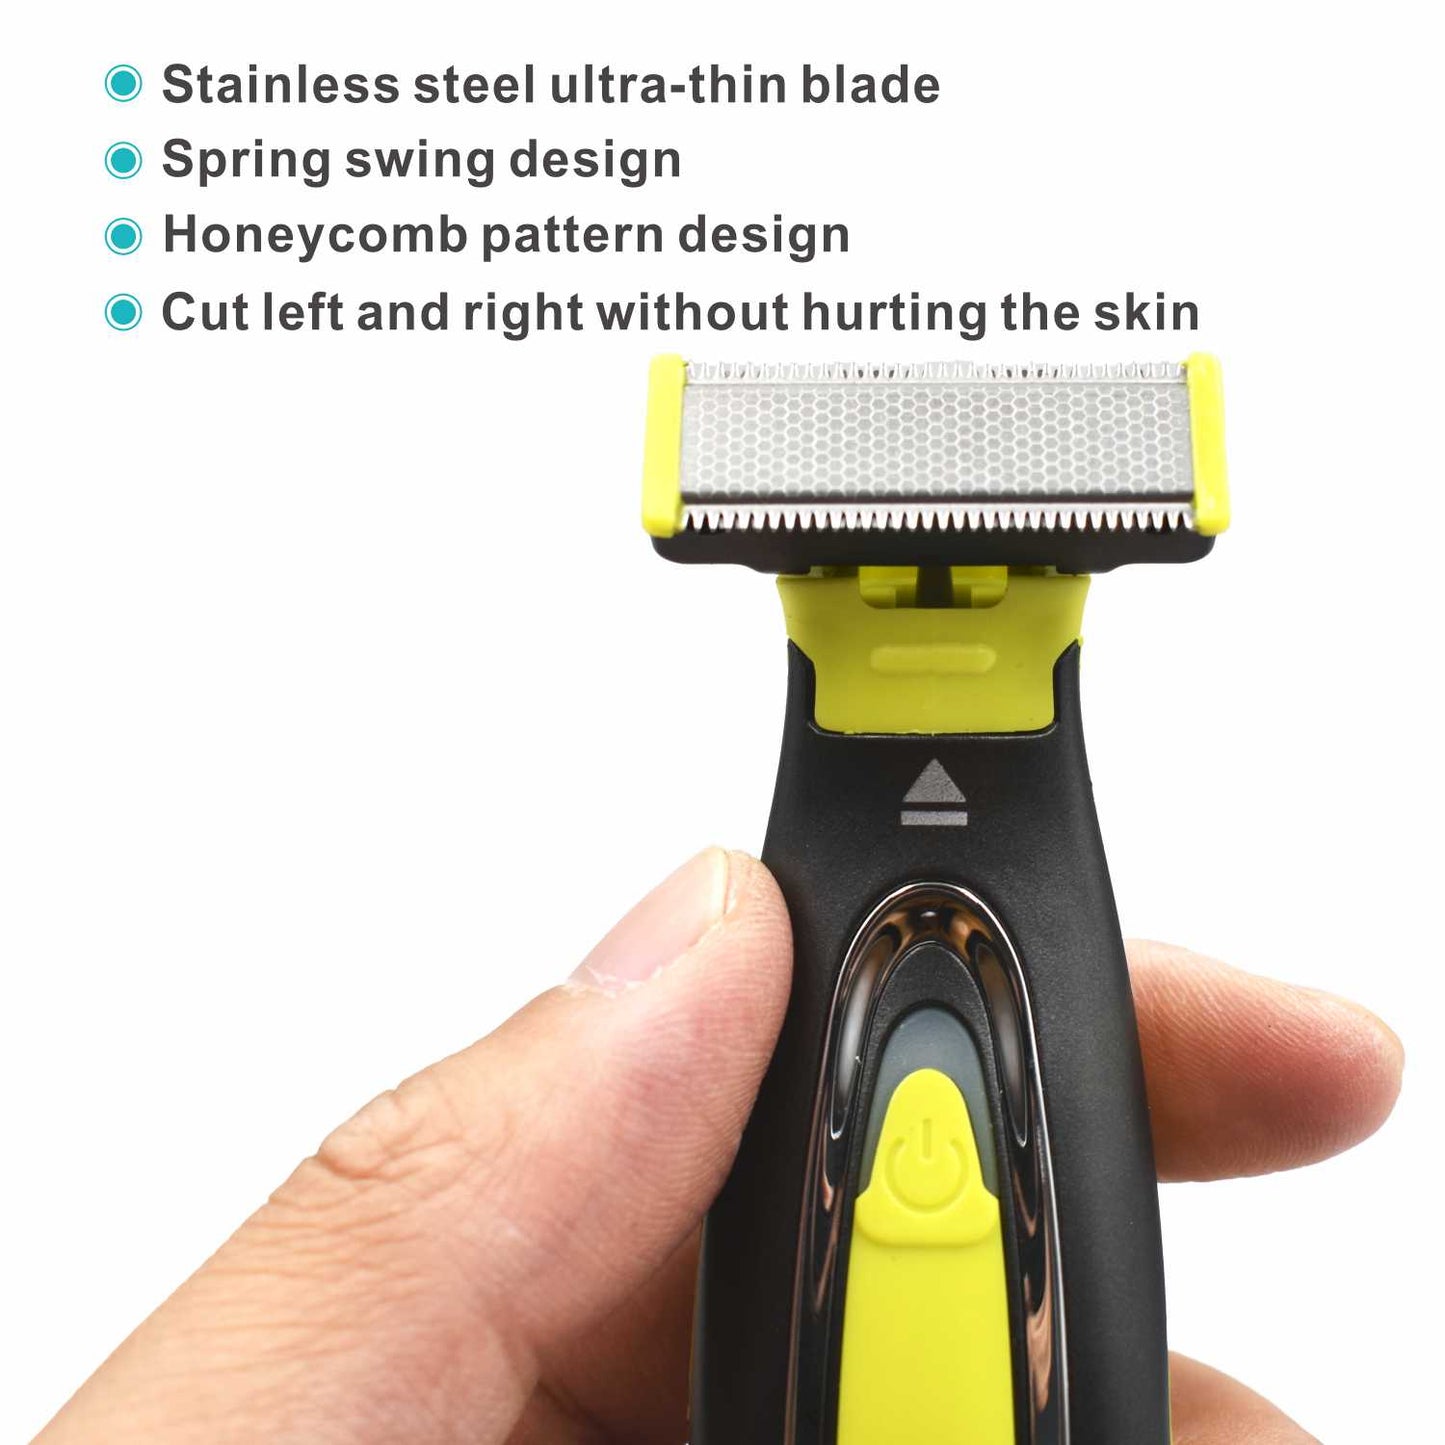 Replacement Beard Trimmer Shaver